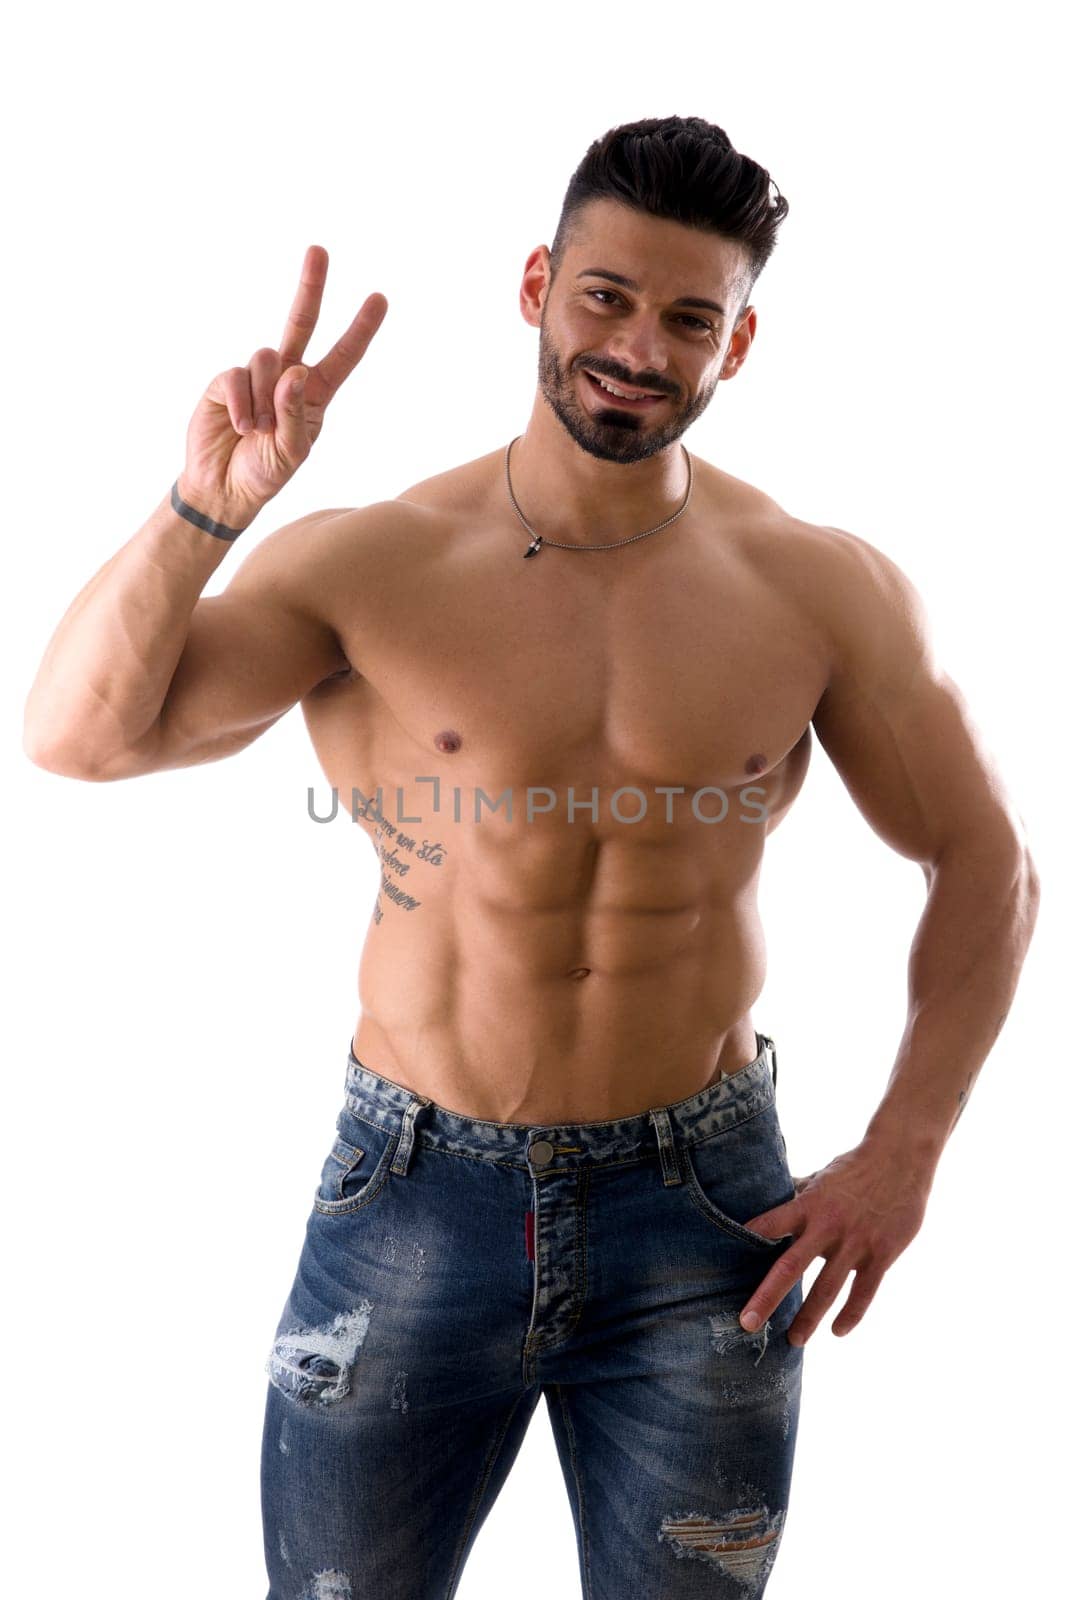 Shirtless Man Posing for the Camera by artofphoto